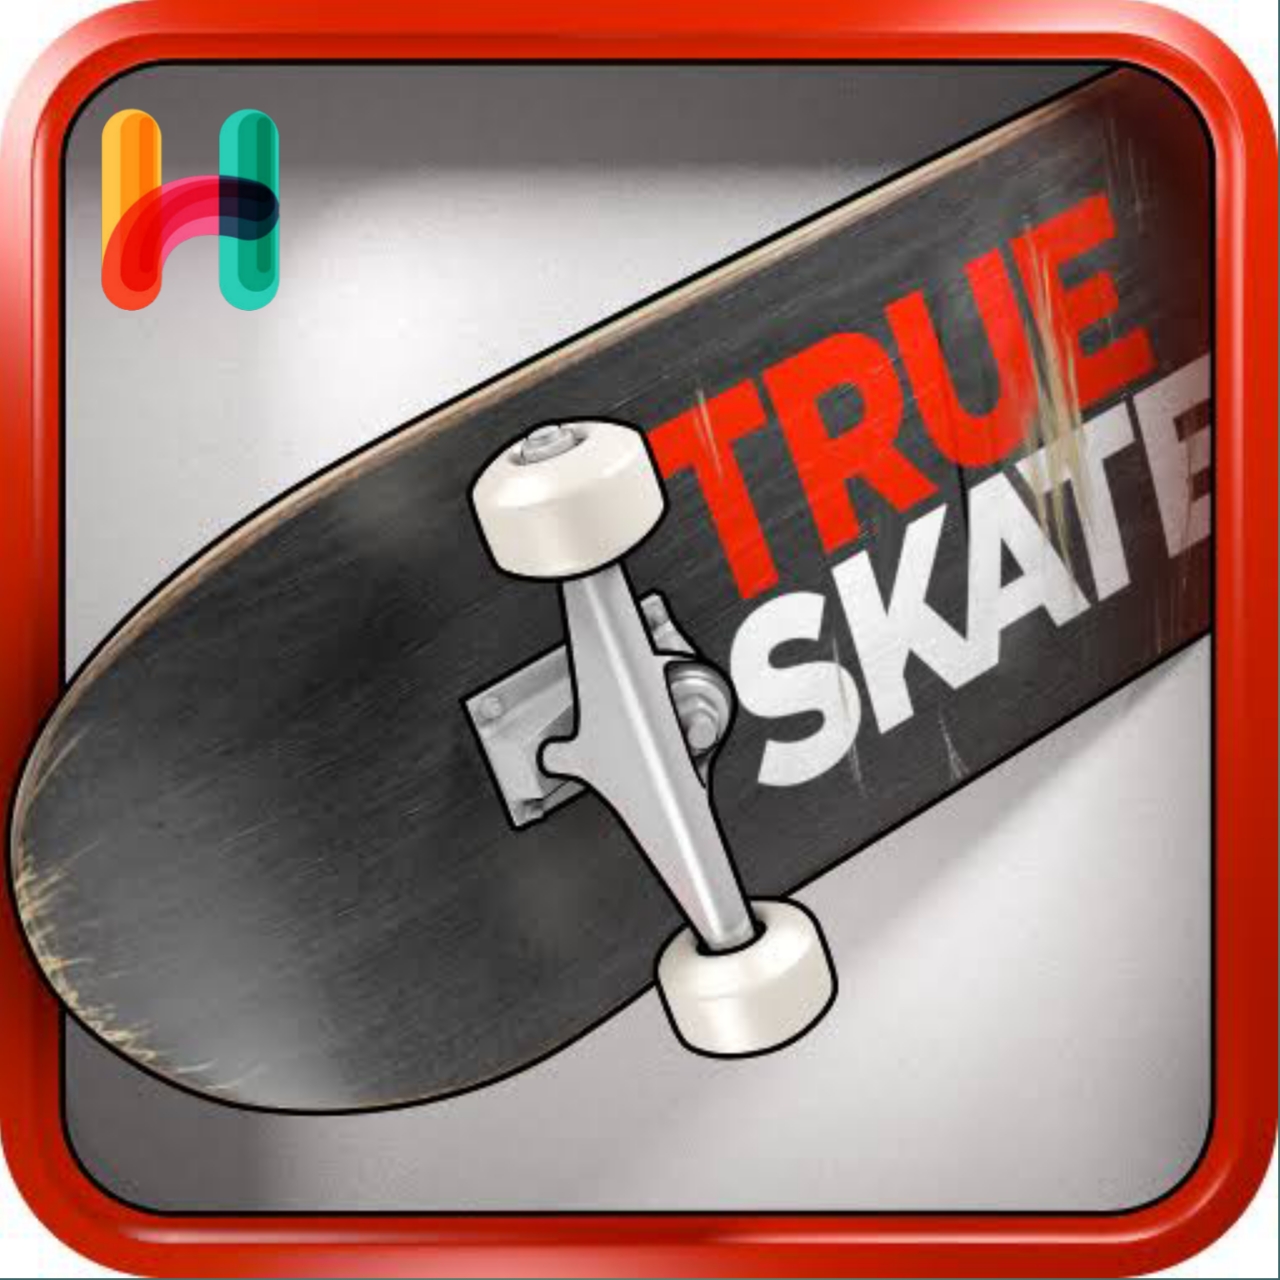 Download True Skate (MOD, Unlimited Money) 1.5.55 free on android Fre Download